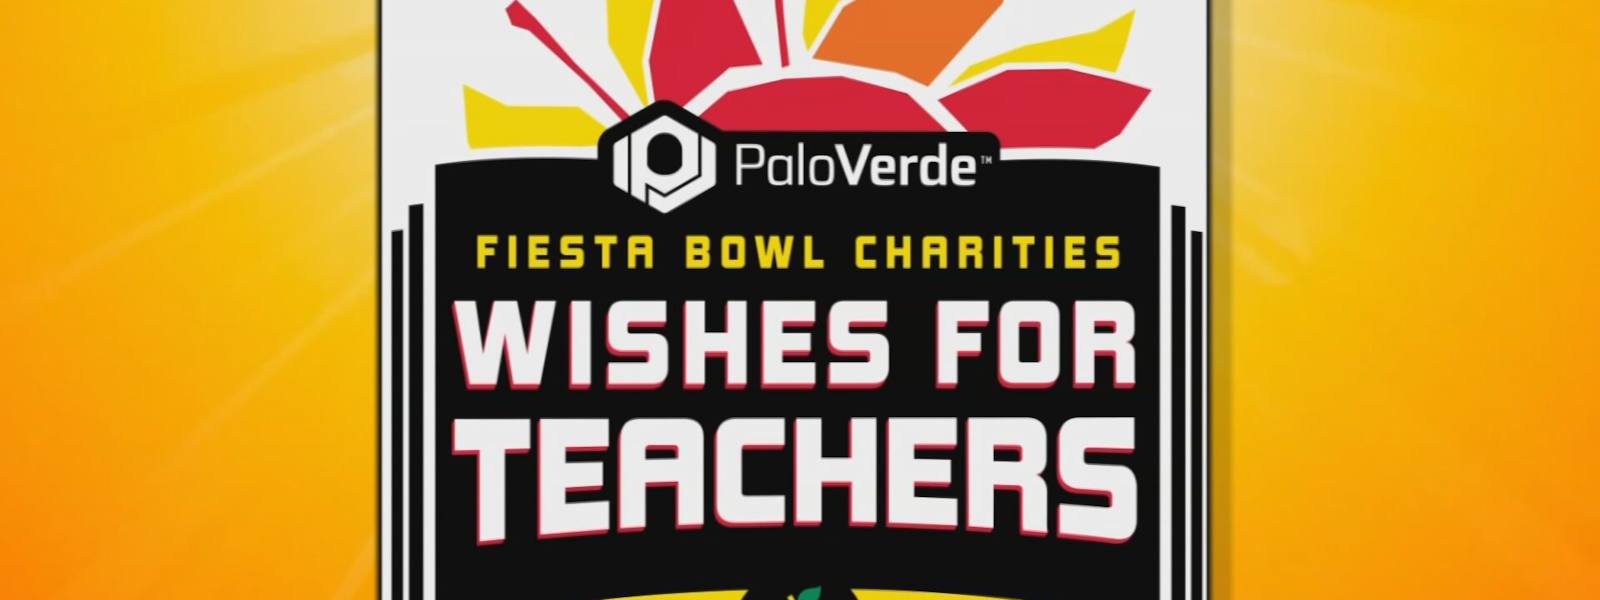 wishes for teachers graphic